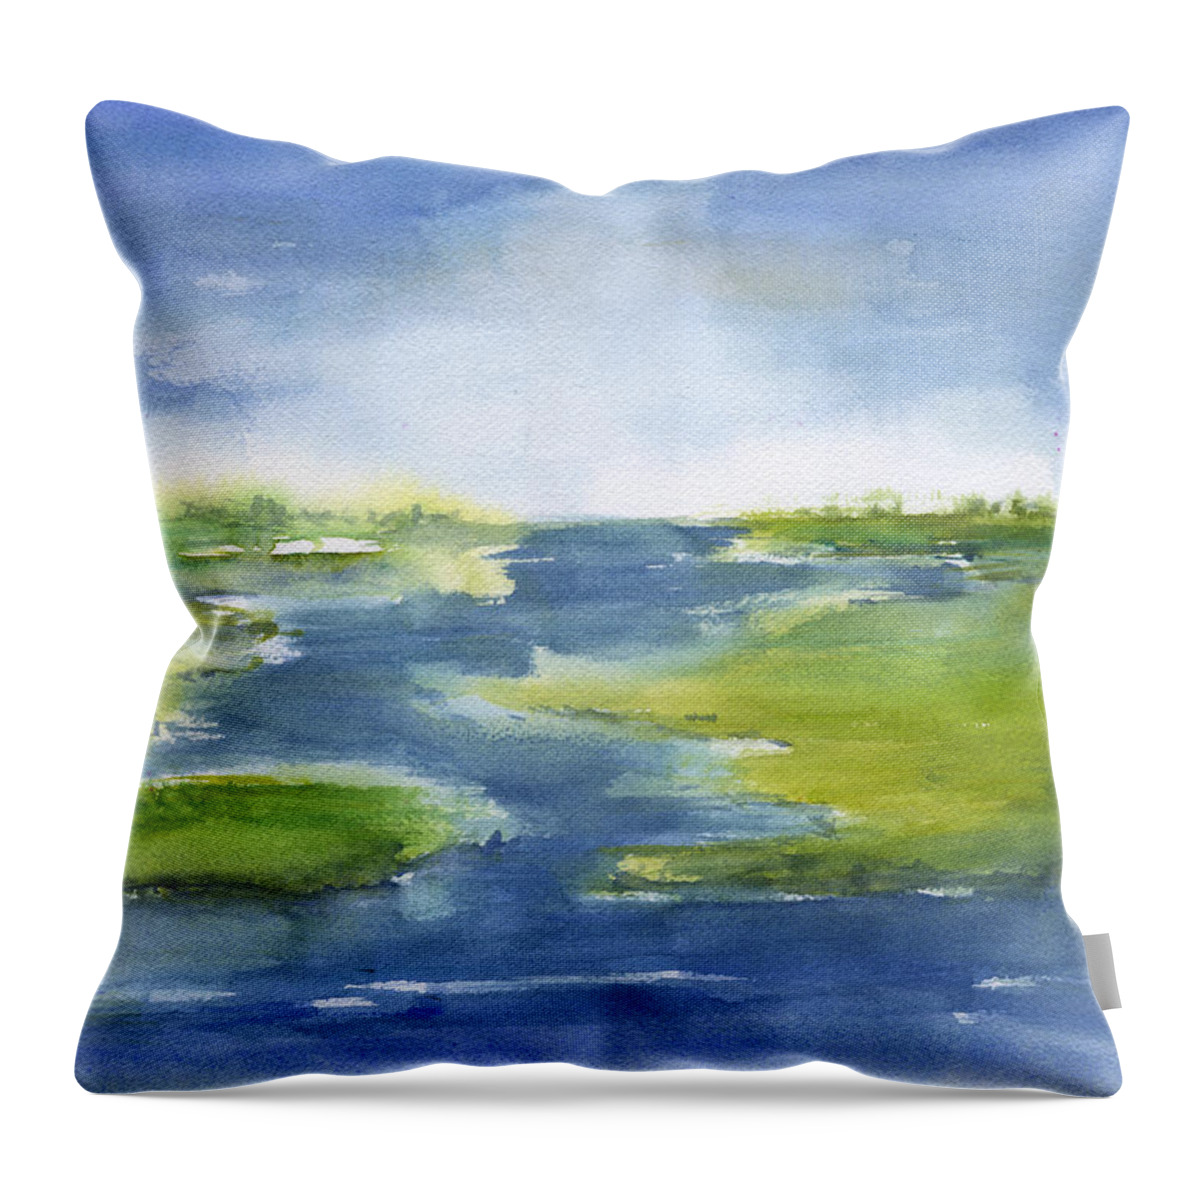 Winding Marsh Throw Pillow featuring the painting Winding Marsh by Frank Bright